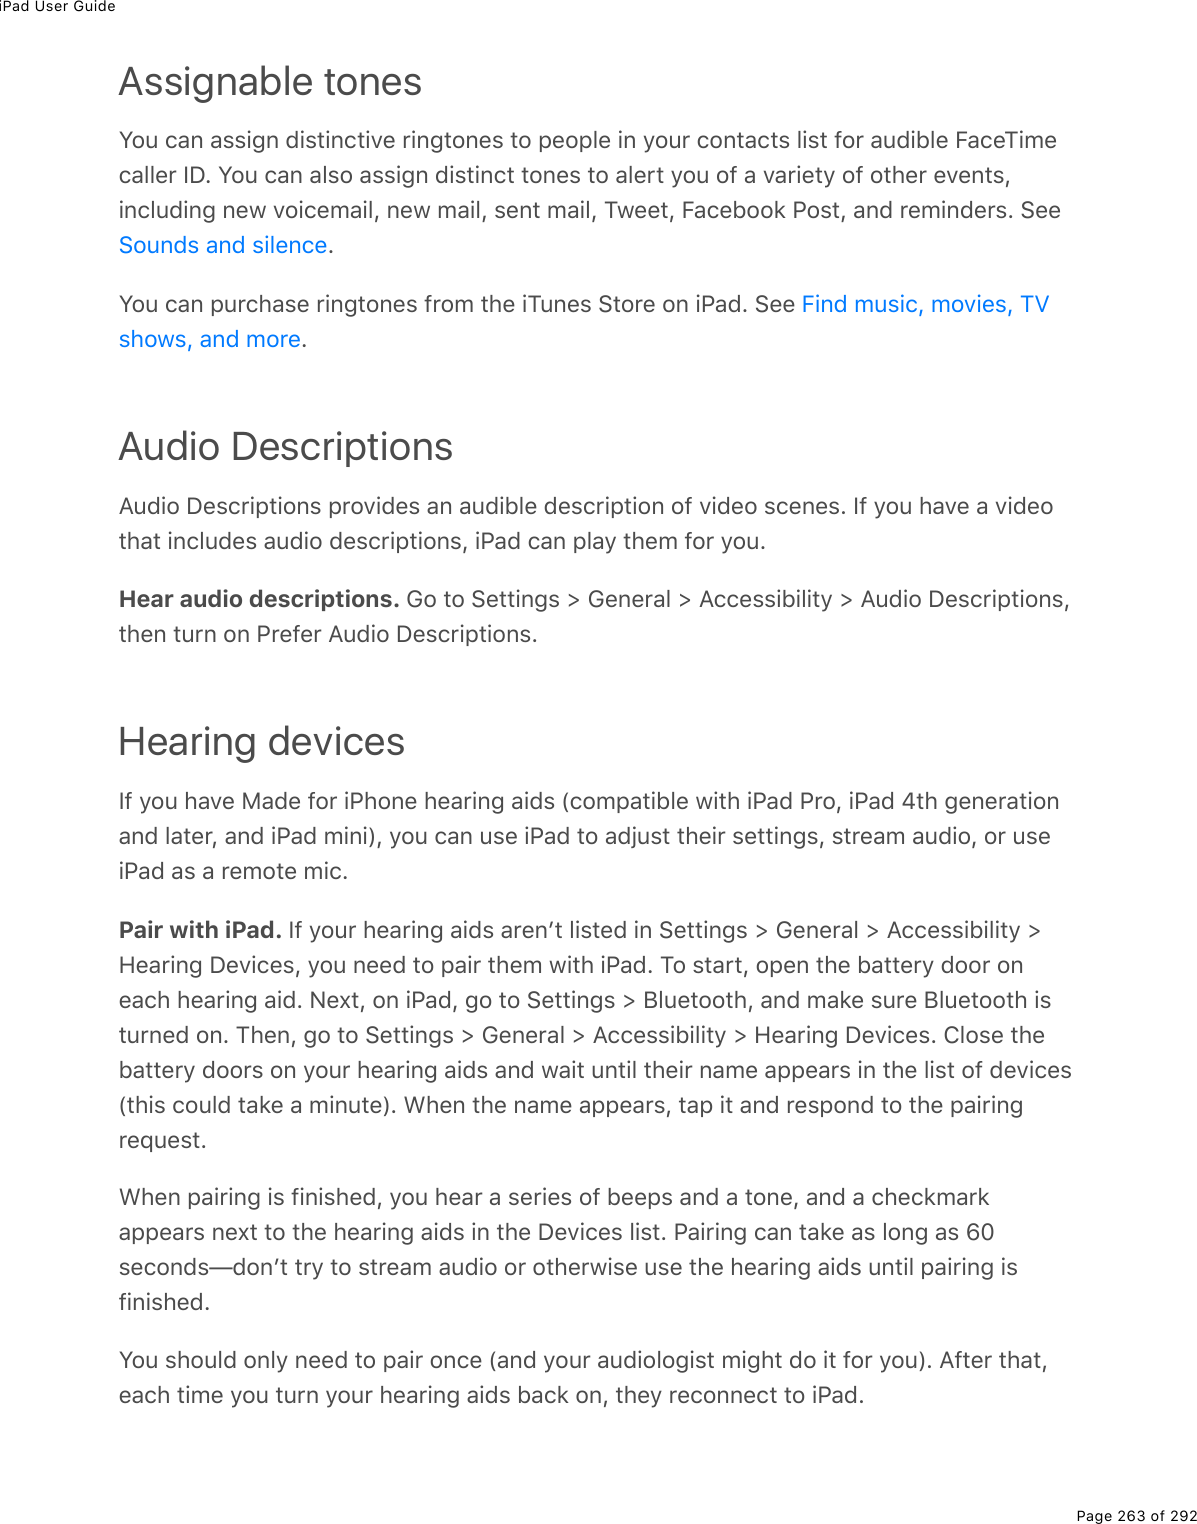 iPad User GuidePage 263 of 292Assignable tonesYou can assign distinctive ringtones to people in your contacts list for audible FaceTimecaller ID. You can also assign distinct tones to alert you of a variety of other events,including new voicemail, new mail, sent mail, Tweet, Facebook Post, and reminders. See.You can purchase ringtones from the iTunes Store on iPad. See .Audio DescriptionsAudio Descriptions provides an audible description of video scenes. If you have a videothat includes audio descriptions, iPad can play them for you.Hear audio descriptions. Go to Settings &gt; General &gt; Accessibility &gt; Audio Descriptions,then turn on Prefer Audio Descriptions.Hearing devicesIf you have Made for iPhone hearing aids (compatible with iPad Pro, iPad 4th generationand later, and iPad mini), you can use iPad to adjust their settings, stream audio, or useiPad as a remote mic.Pair with iPad. If your hearing aids arenʼt listed in Settings &gt; General &gt; Accessibility &gt;Hearing Devices, you need to pair them with iPad. To start, open the battery door oneach hearing aid. Next, on iPad, go to Settings &gt; Bluetooth, and make sure Bluetooth isturned on. Then, go to Settings &gt; General &gt; Accessibility &gt; Hearing Devices. Close thebattery doors on your hearing aids and wait until their name appears in the list of devices(this could take a minute). When the name appears, tap it and respond to the pairingrequest.When pairing is finished, you hear a series of beeps and a tone, and a checkmarkappears next to the hearing aids in the Devices list. Pairing can take as long as 60seconds—donʼt try to stream audio or otherwise use the hearing aids until pairing isfinished.You should only need to pair once (and your audiologist might do it for you). After that,each time you turn your hearing aids back on, they reconnect to iPad.Sounds and silenceFind music, movies, TVshows, and more